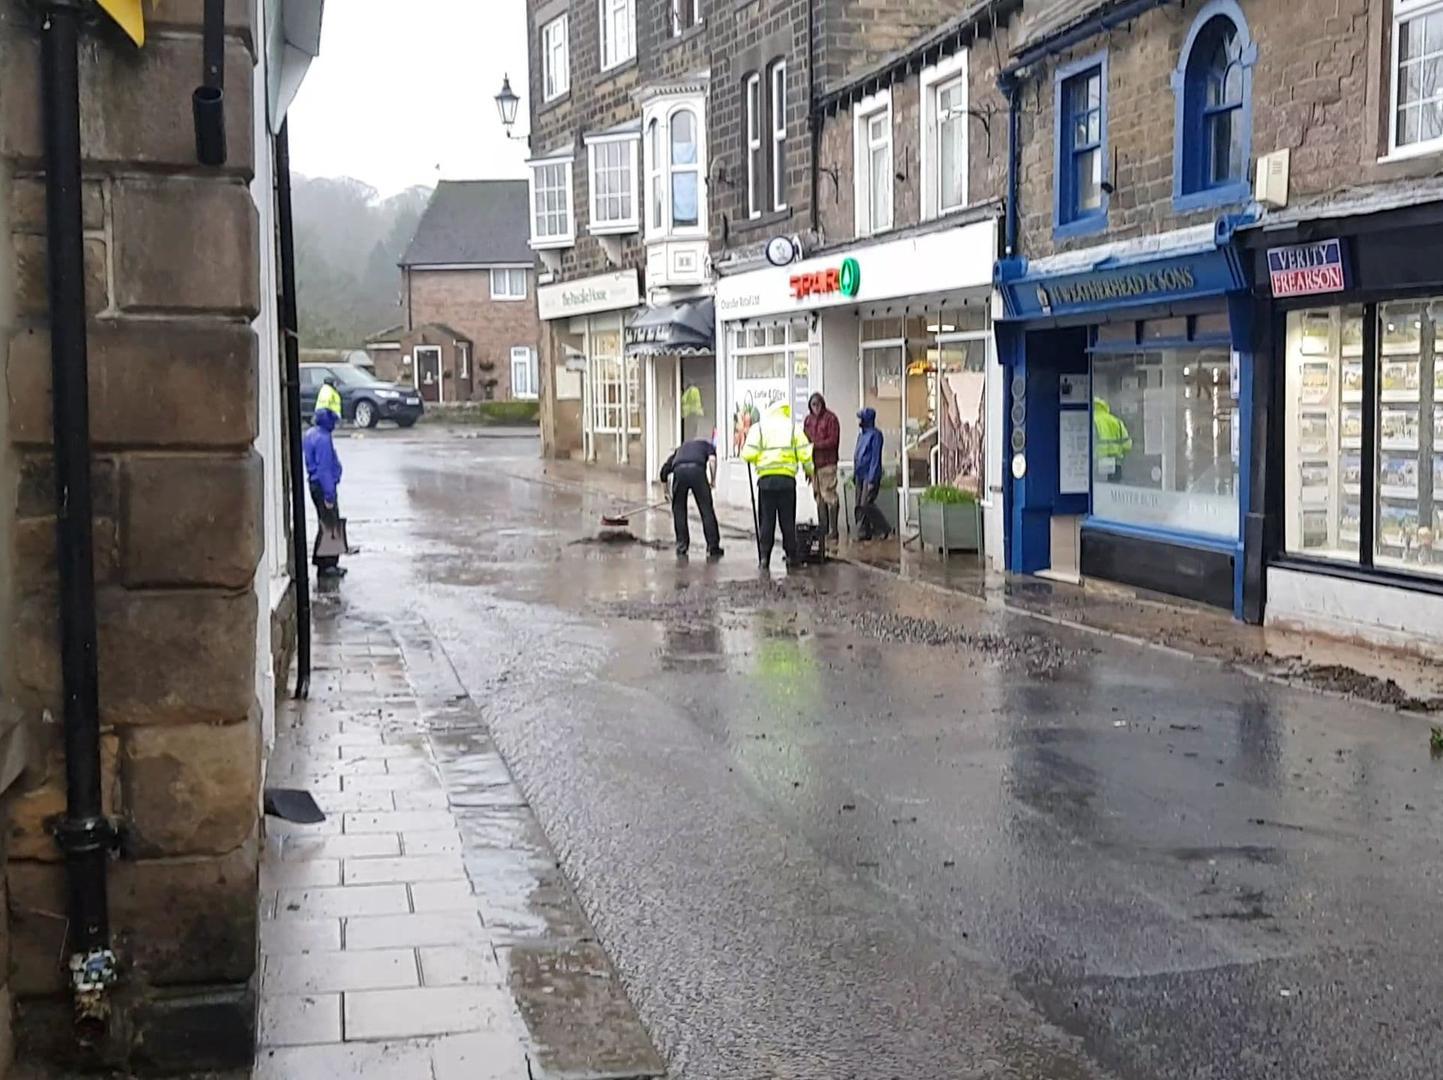 Just part of Pateley's clean-up operation on the High Street.